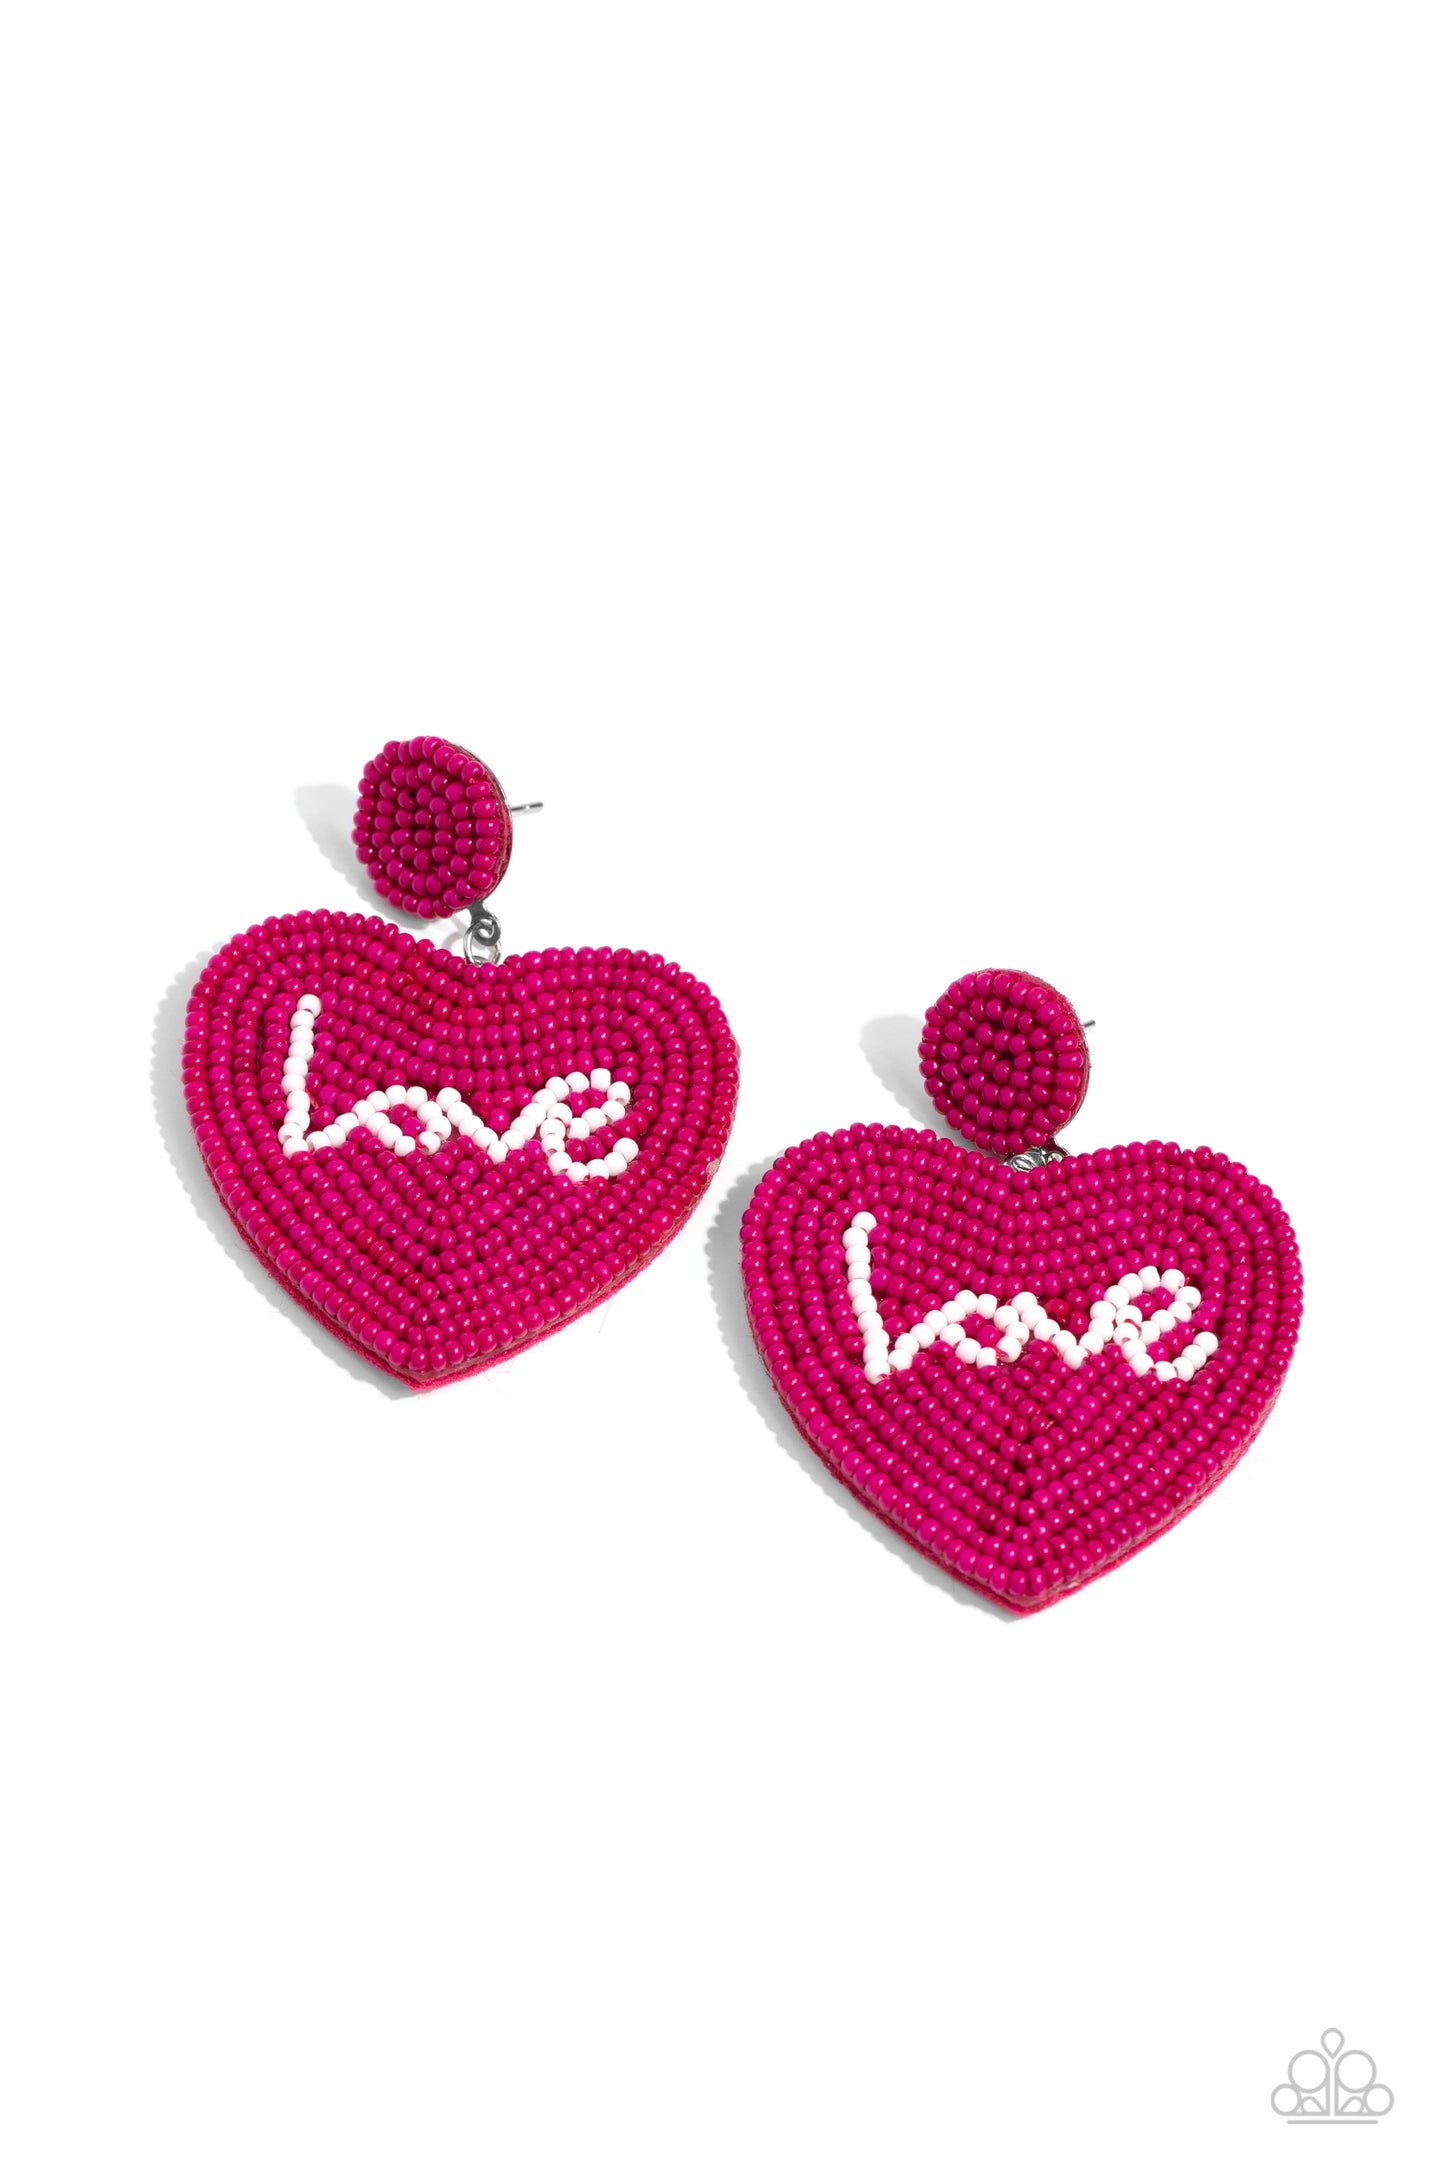 Paparazzi Accessories - Sweet Seeds - Pink Heart Earrings hot pink rows of dainty seed beads adorn the front of a heart frame at the bottom of a matching beaded fitting, creating a blissfully beaded look. The word "Love" is spelled out in white seed beads across the center of the heart frame for a romantic finish. Earring attaches to a standard post fitting.  Sold as one pair of post earrings.